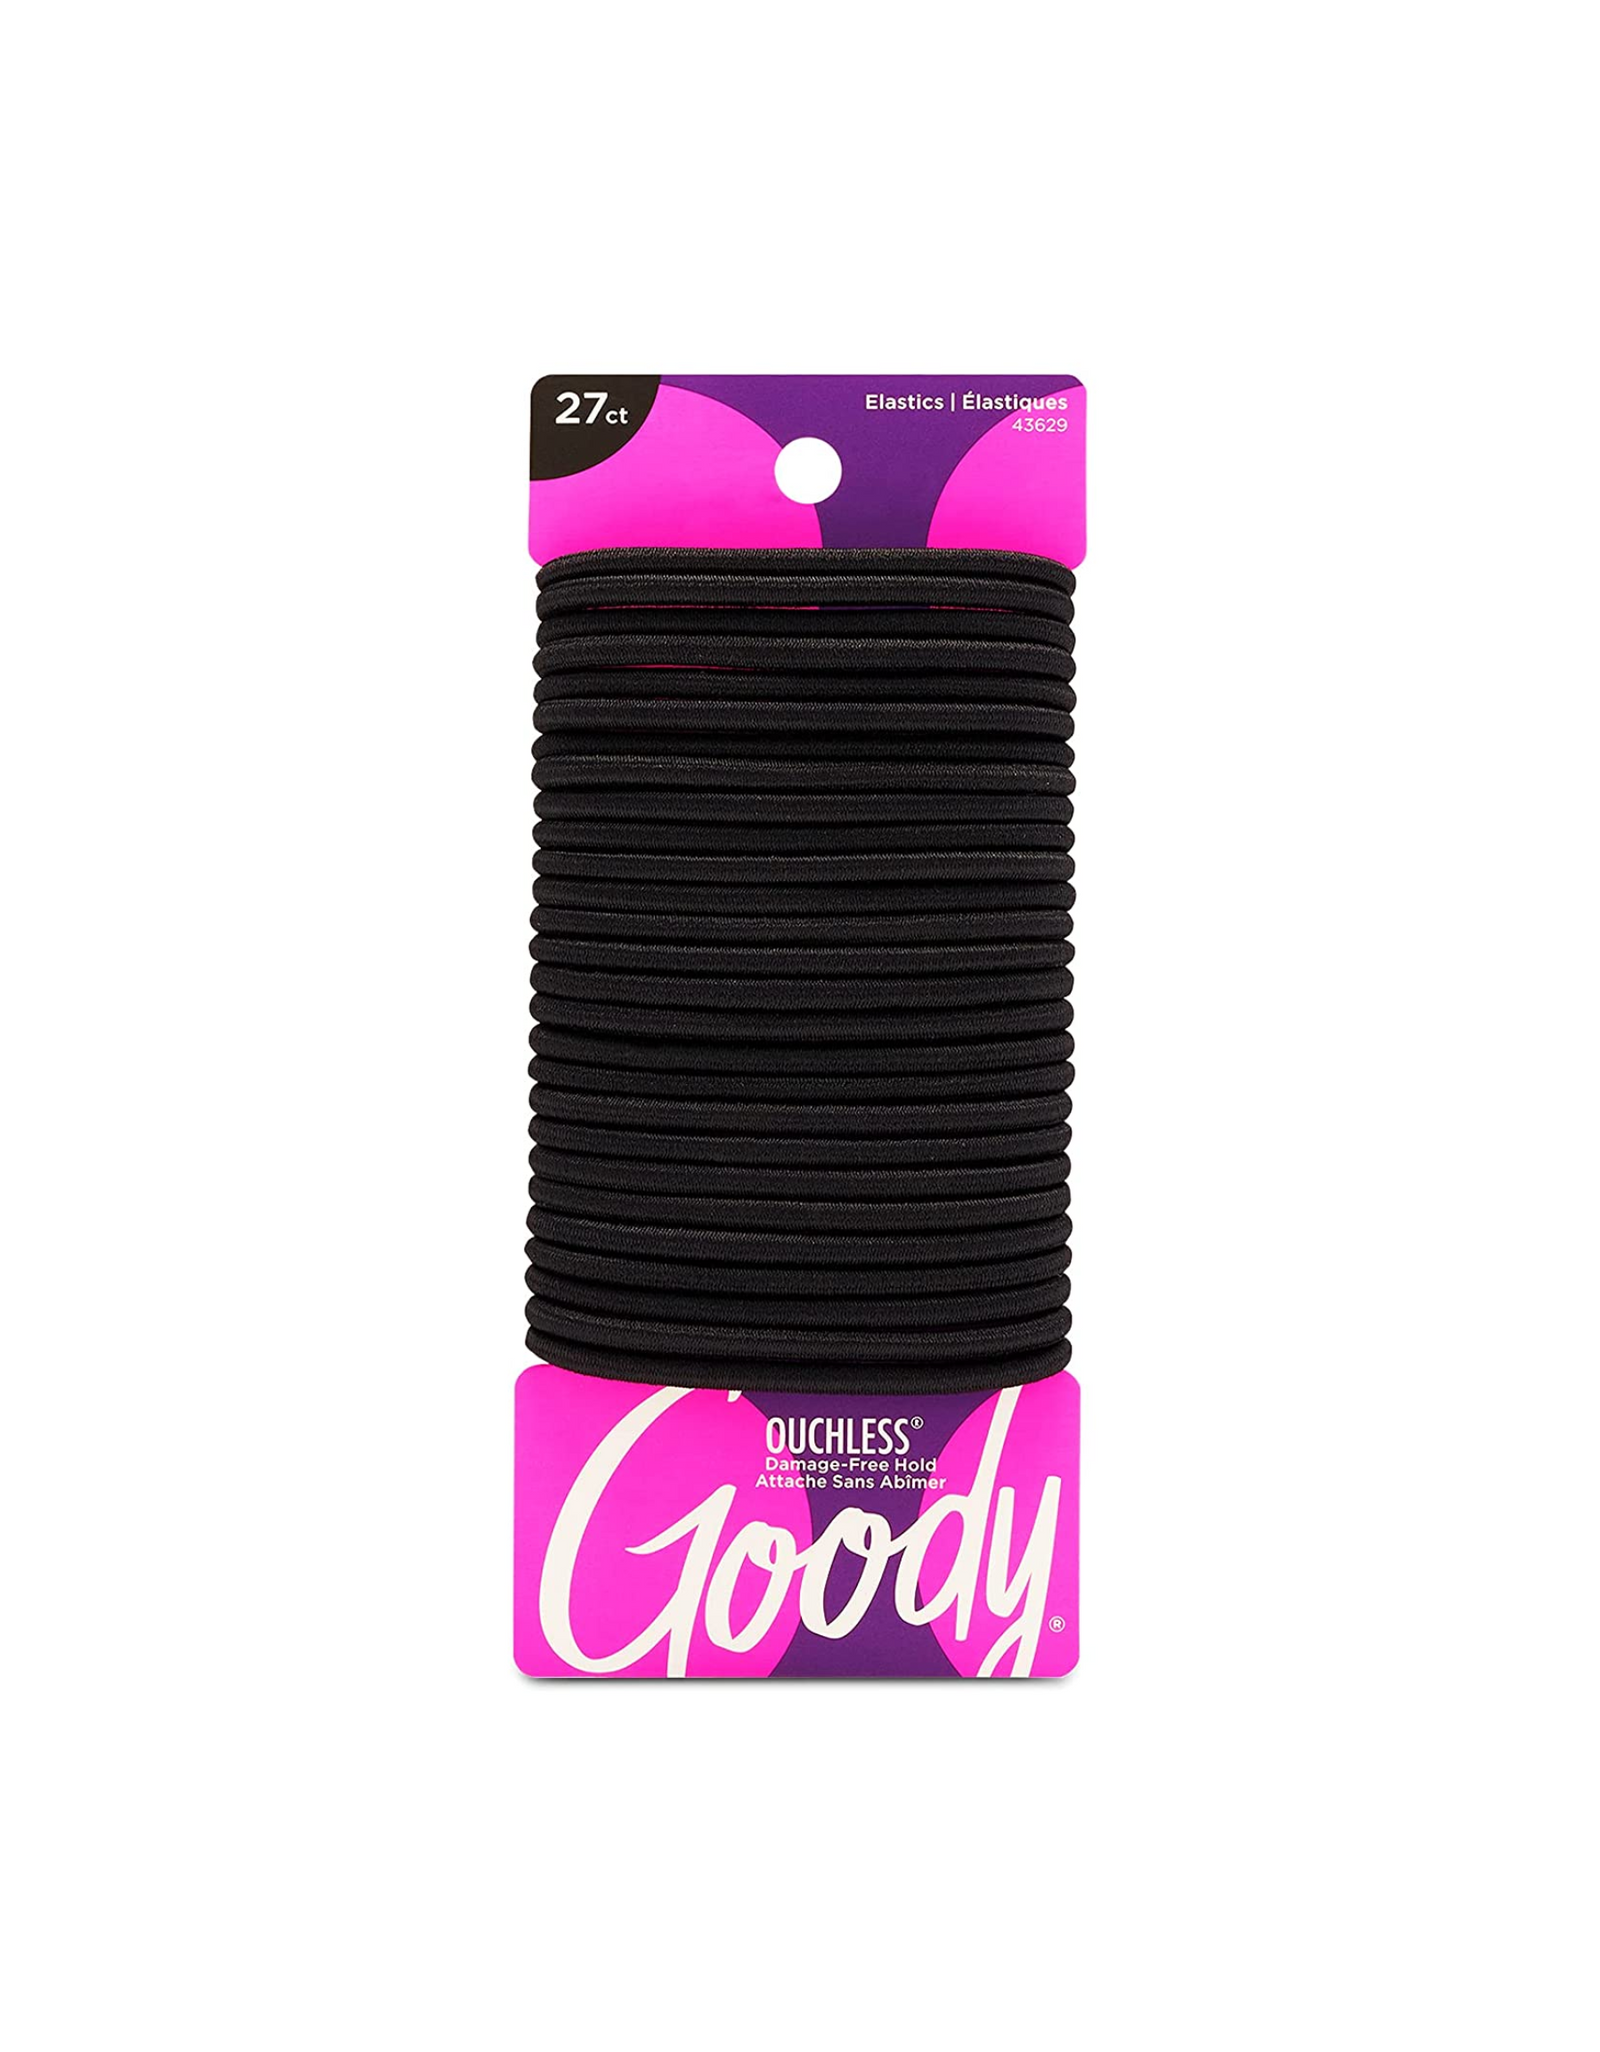 Goody Ouchless Womens Elastic Hair Tie, Black, 27 Count